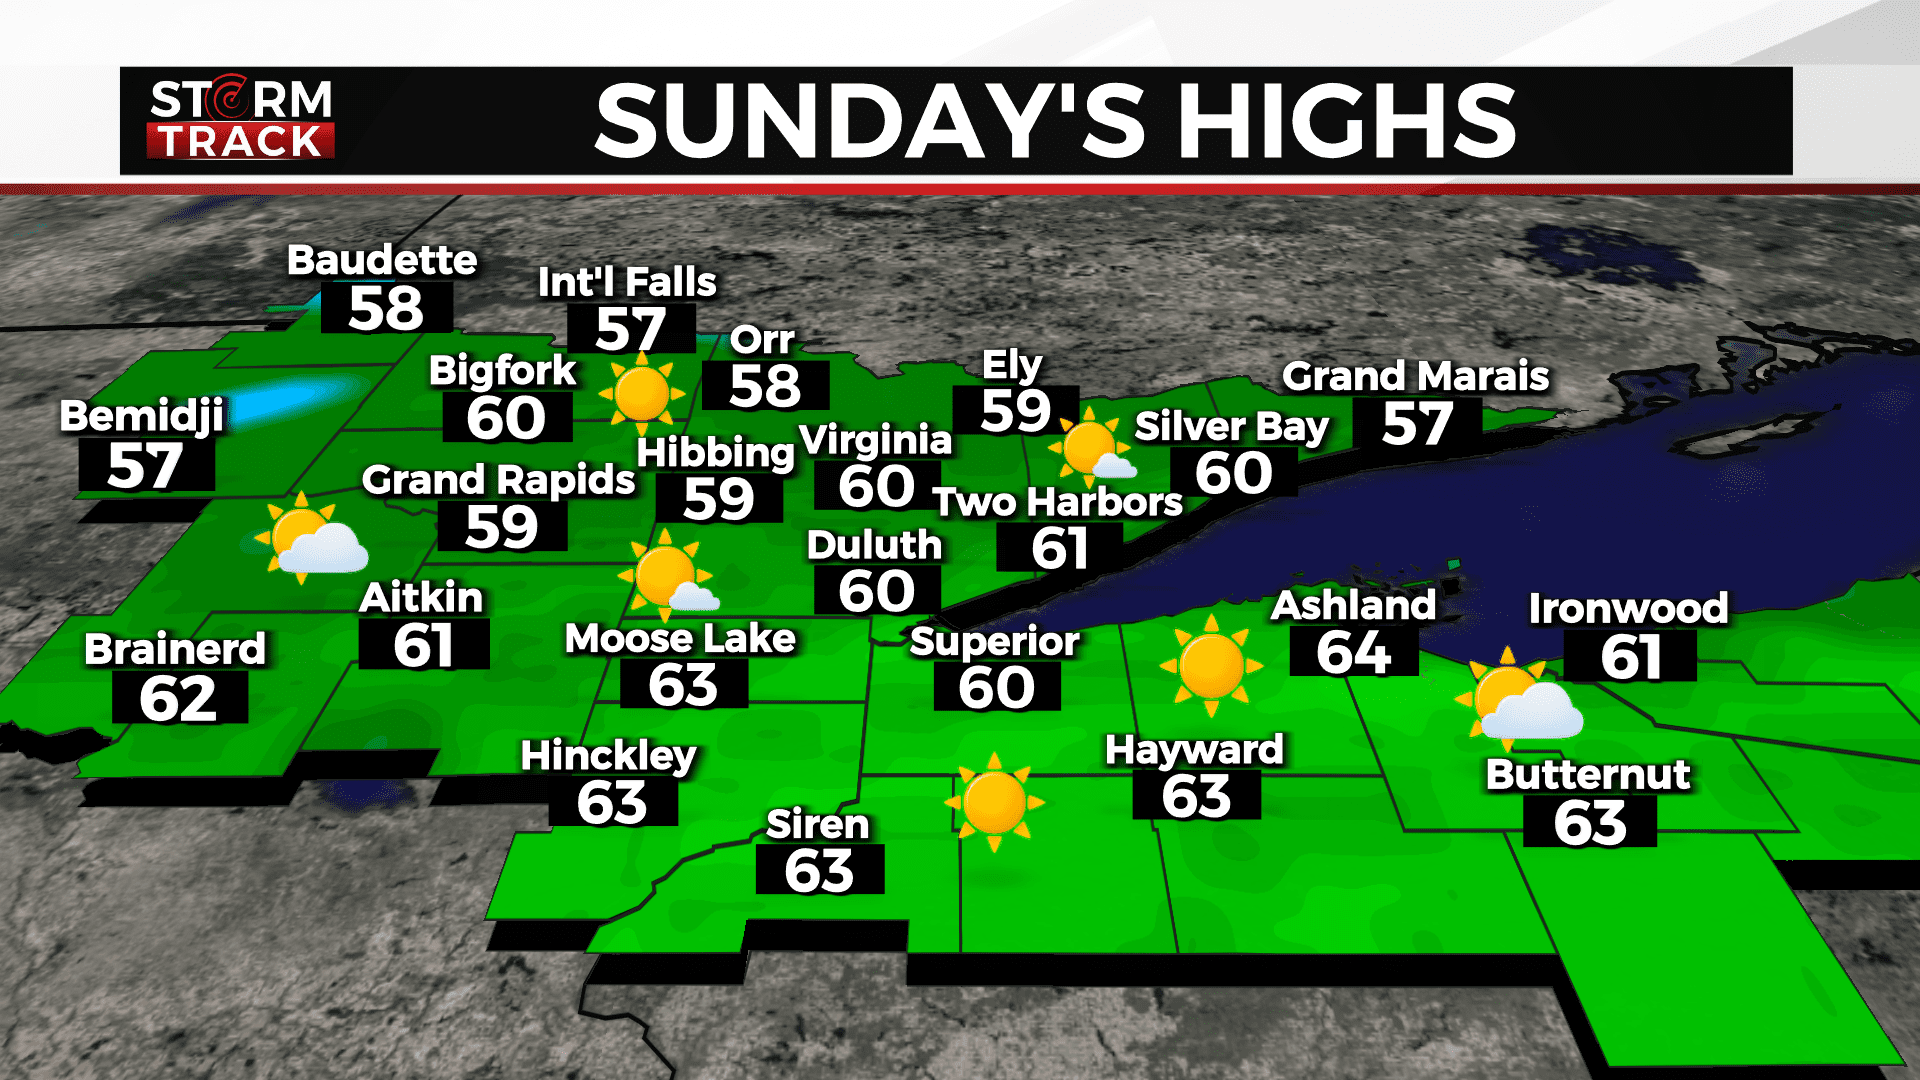 Sunday is mild and sunny